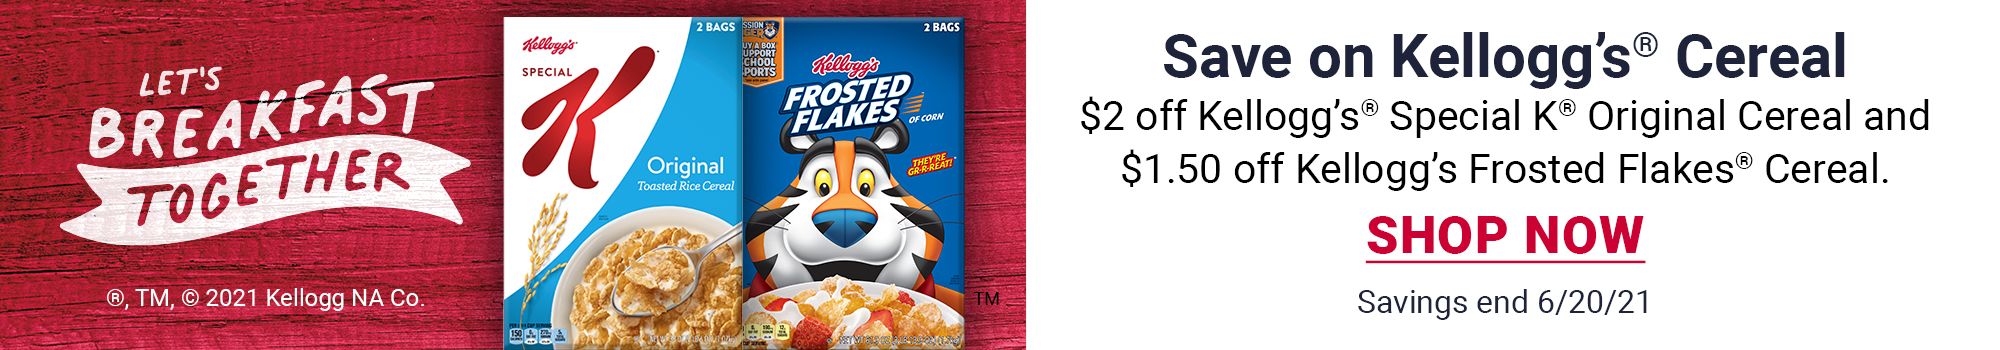 Save on Kellogg’s® Cereal $2 off Kellogg’s® Special K® Original Cereal and $1.50 off Kellogg’s Frosted Flakes® Cereal. SHOP NOW. Savings end 6/20/21